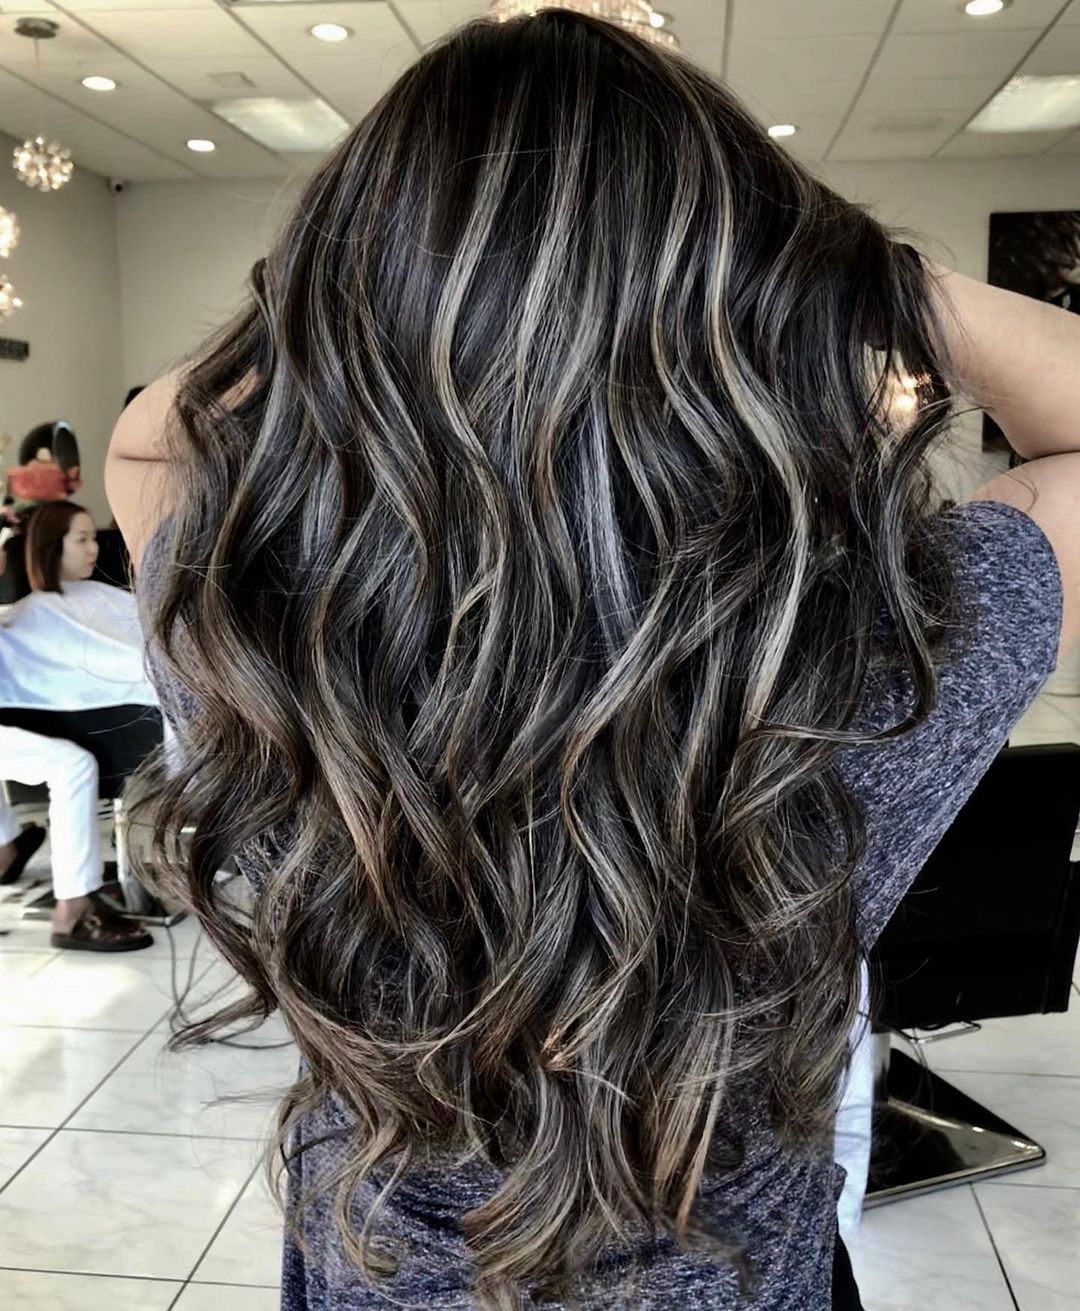 Black go what highlights hair with Brownish Grey